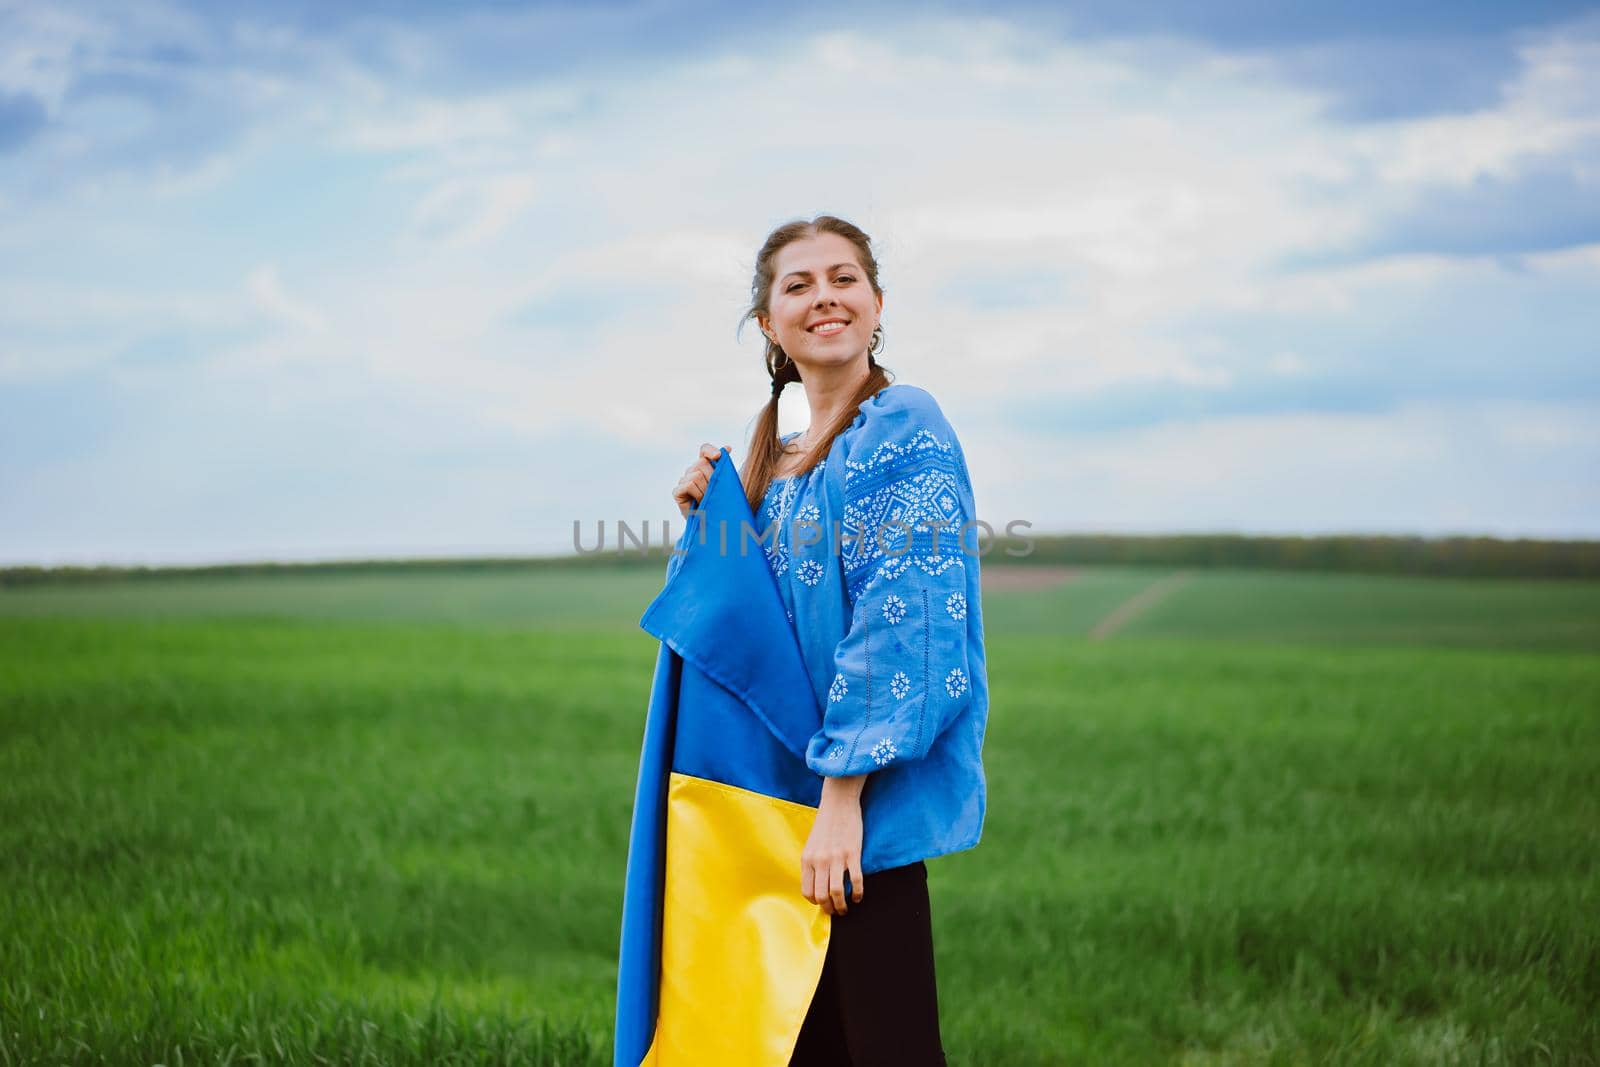 Beautiful ukrainian woman with national flag on green field background. Young lady in blue embroidery vyshyvanka. Ukraine, independence, freedom, patriot symbol, victory in war. High quality photo